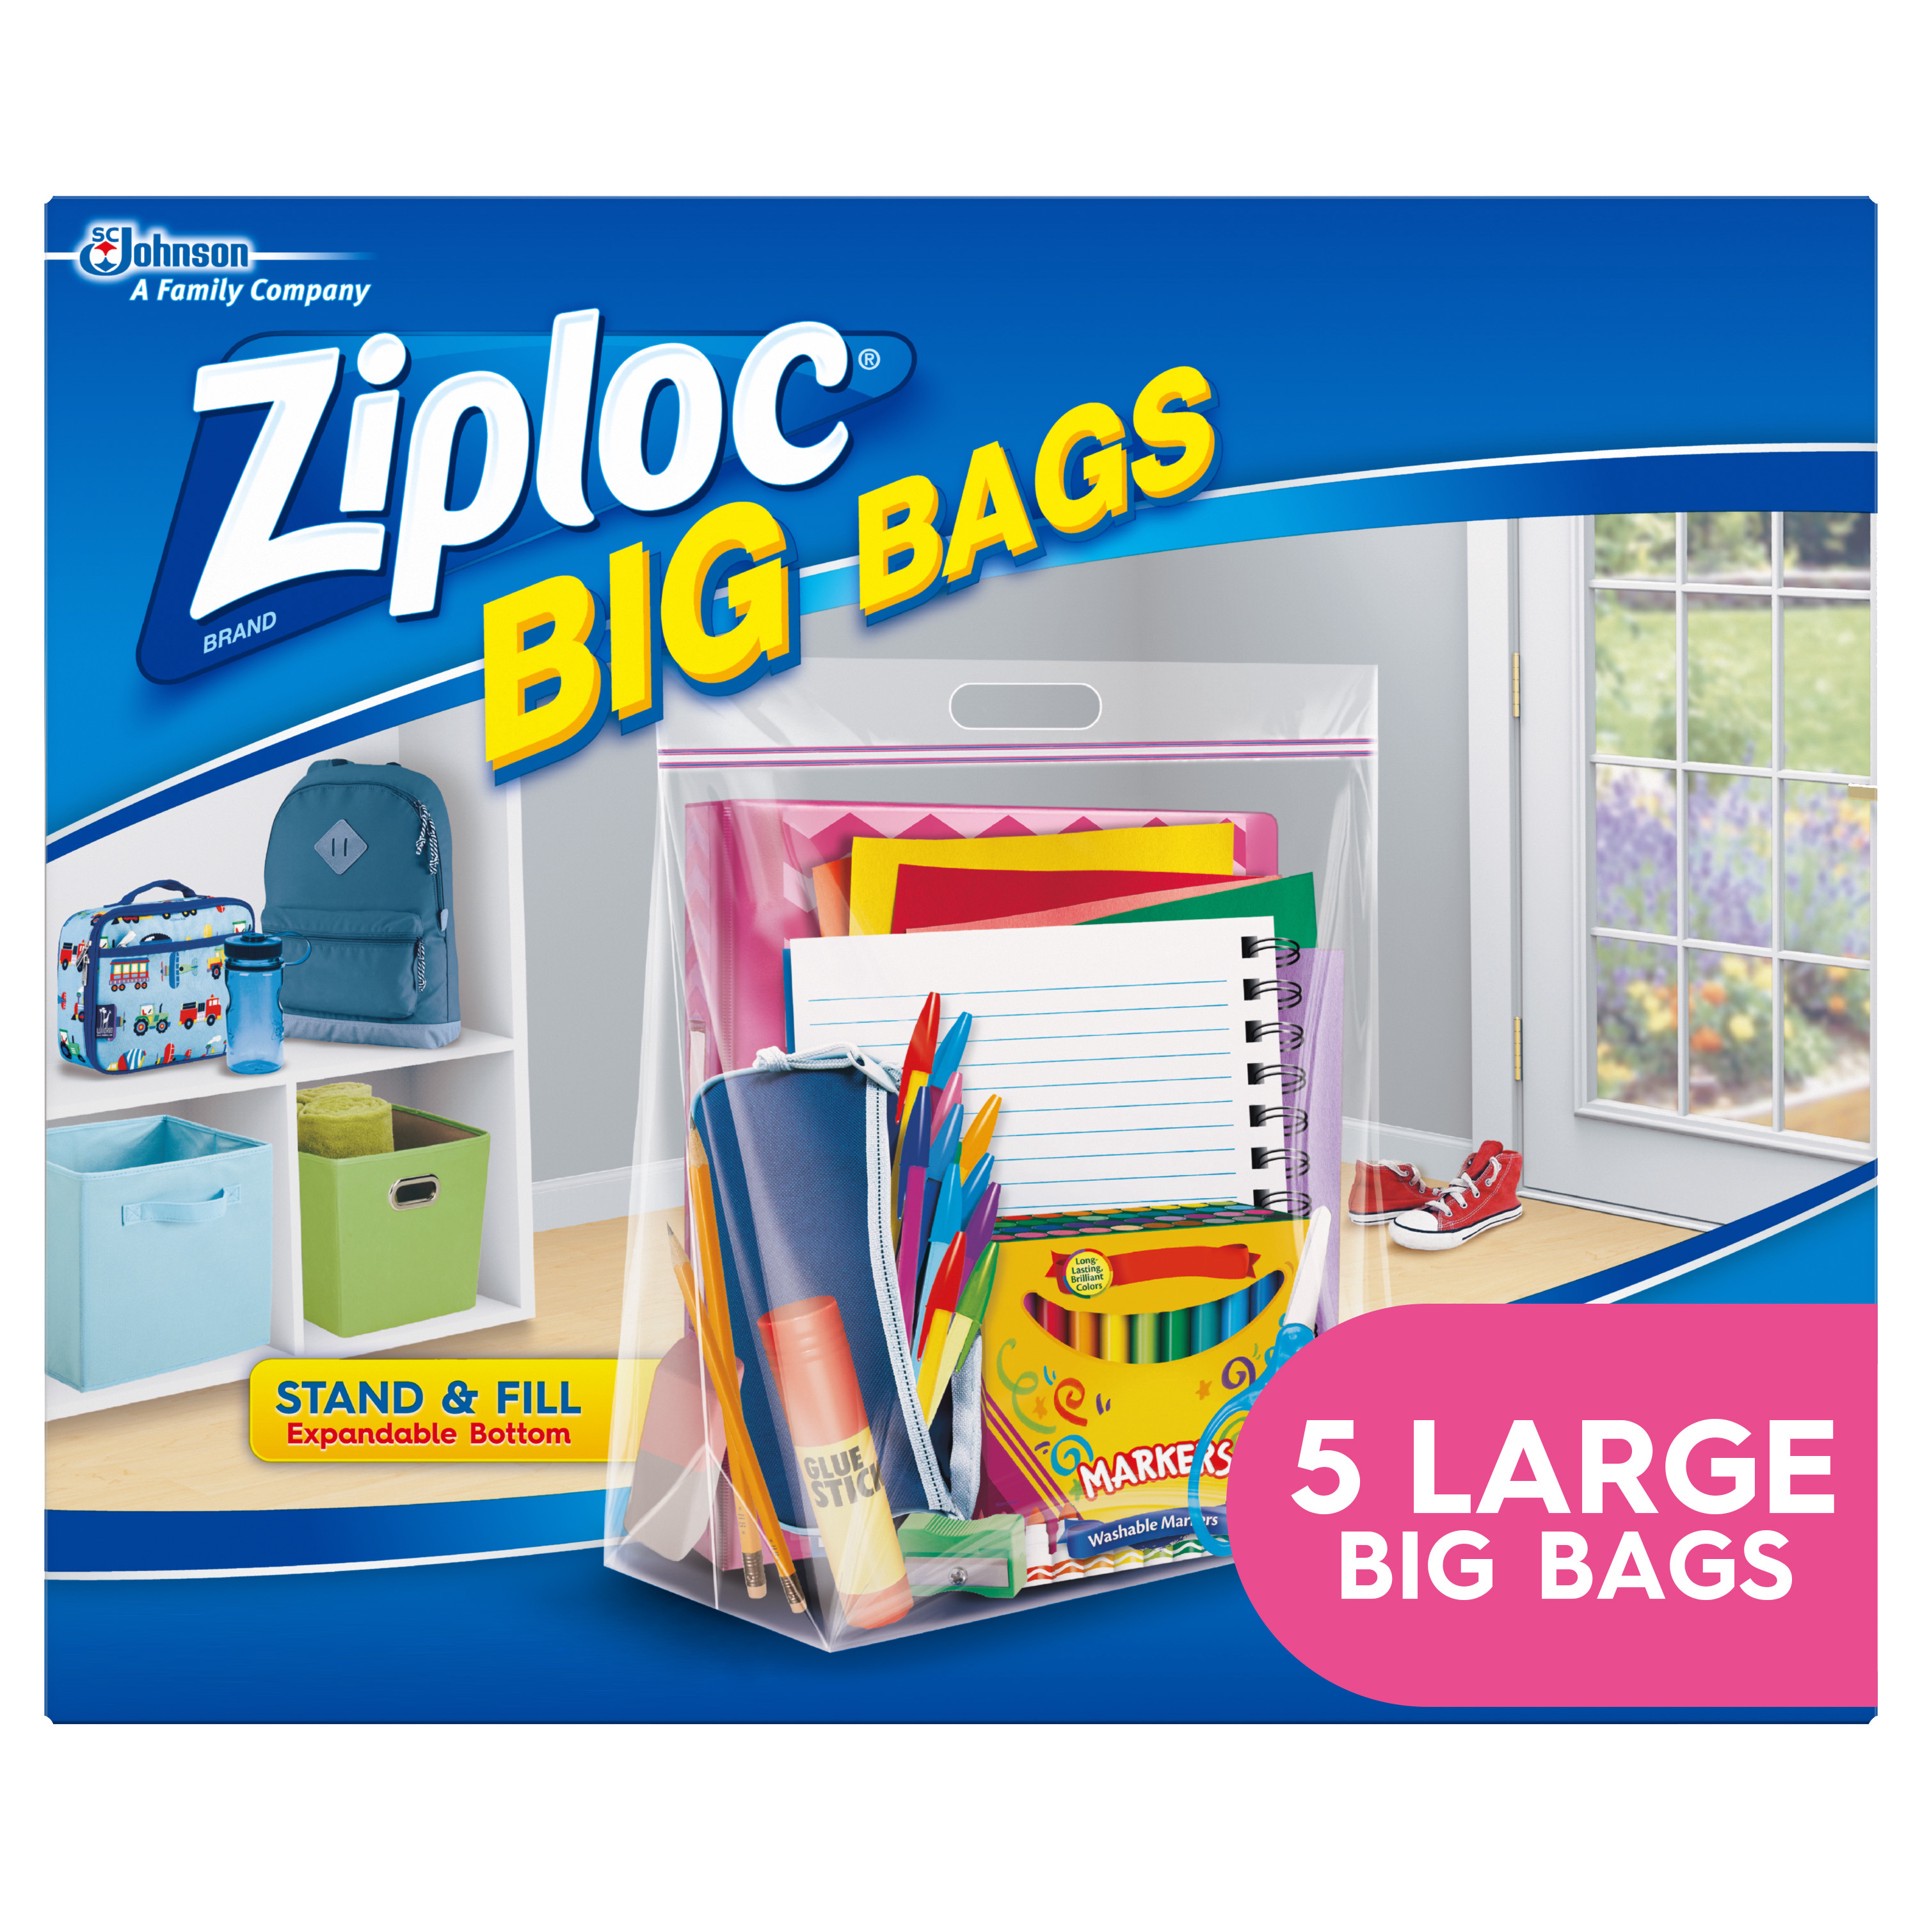 slide 3 of 5, Ziploc Big Bags, Large, Secure Double Zipper, 5 CT,  Expandable Bottom, Heavy-Duty Plastic, Built-In Handles, Flexible Shape to Fit Where Storage Boxes Can't, 5 ct